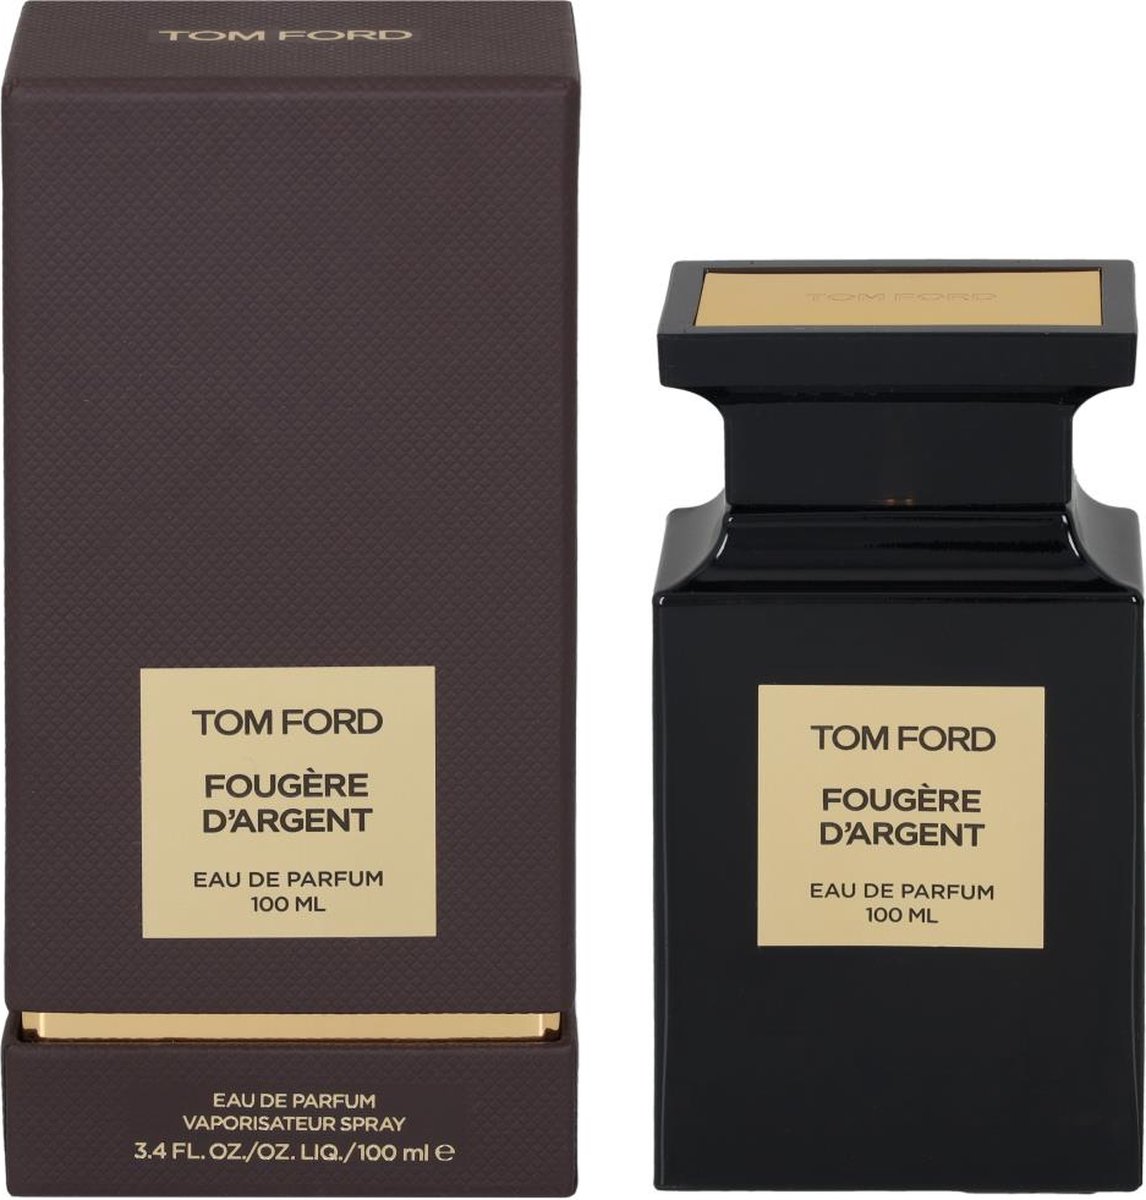 TOM FORD Fougere D'argent Unisexe 100 ml | bol.